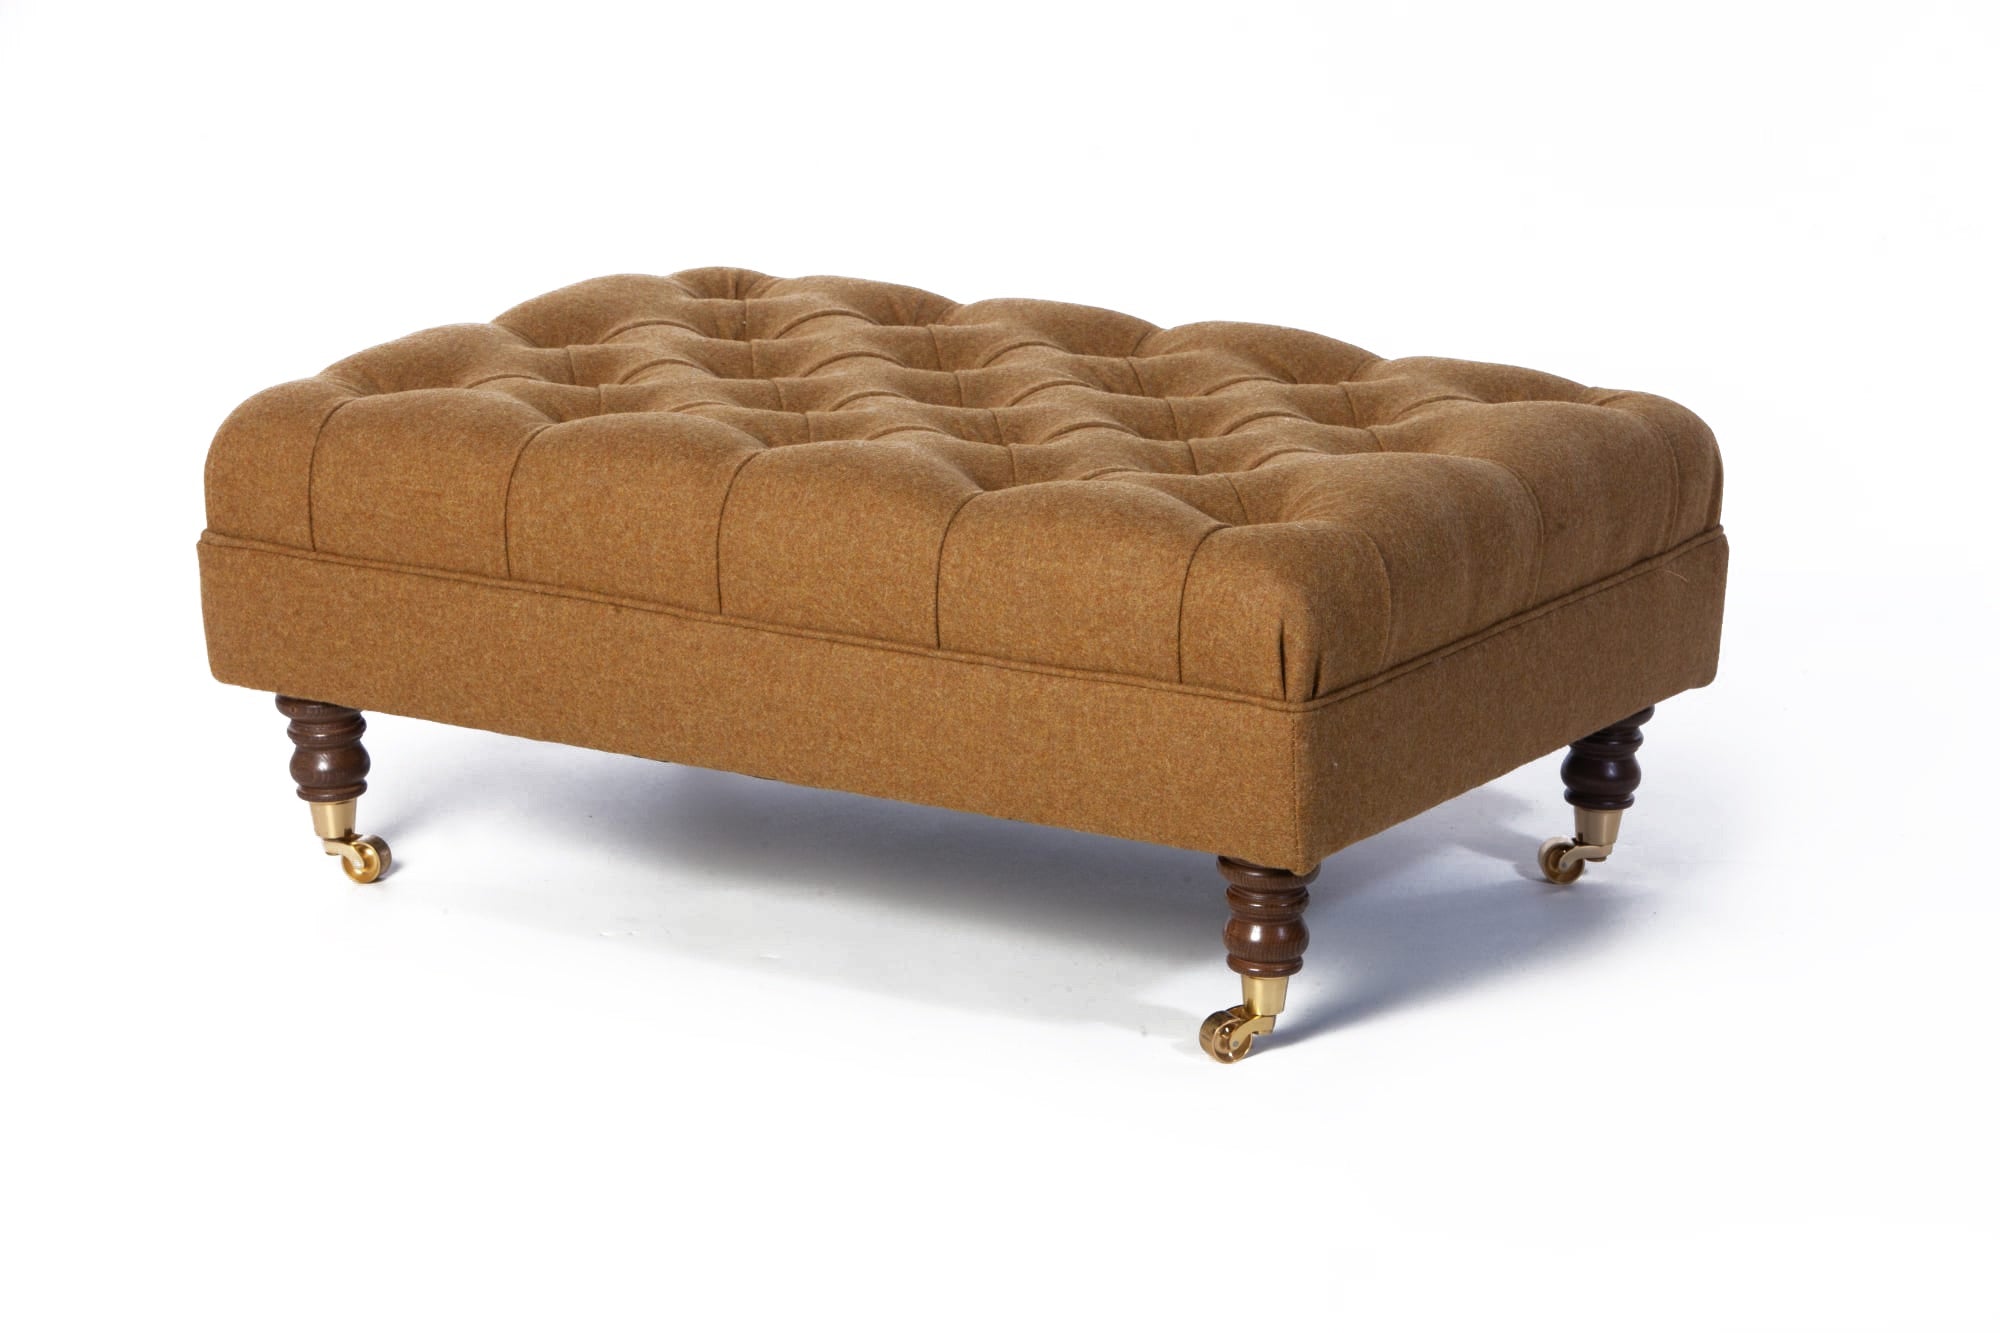 Chessington Buttoned Footstool